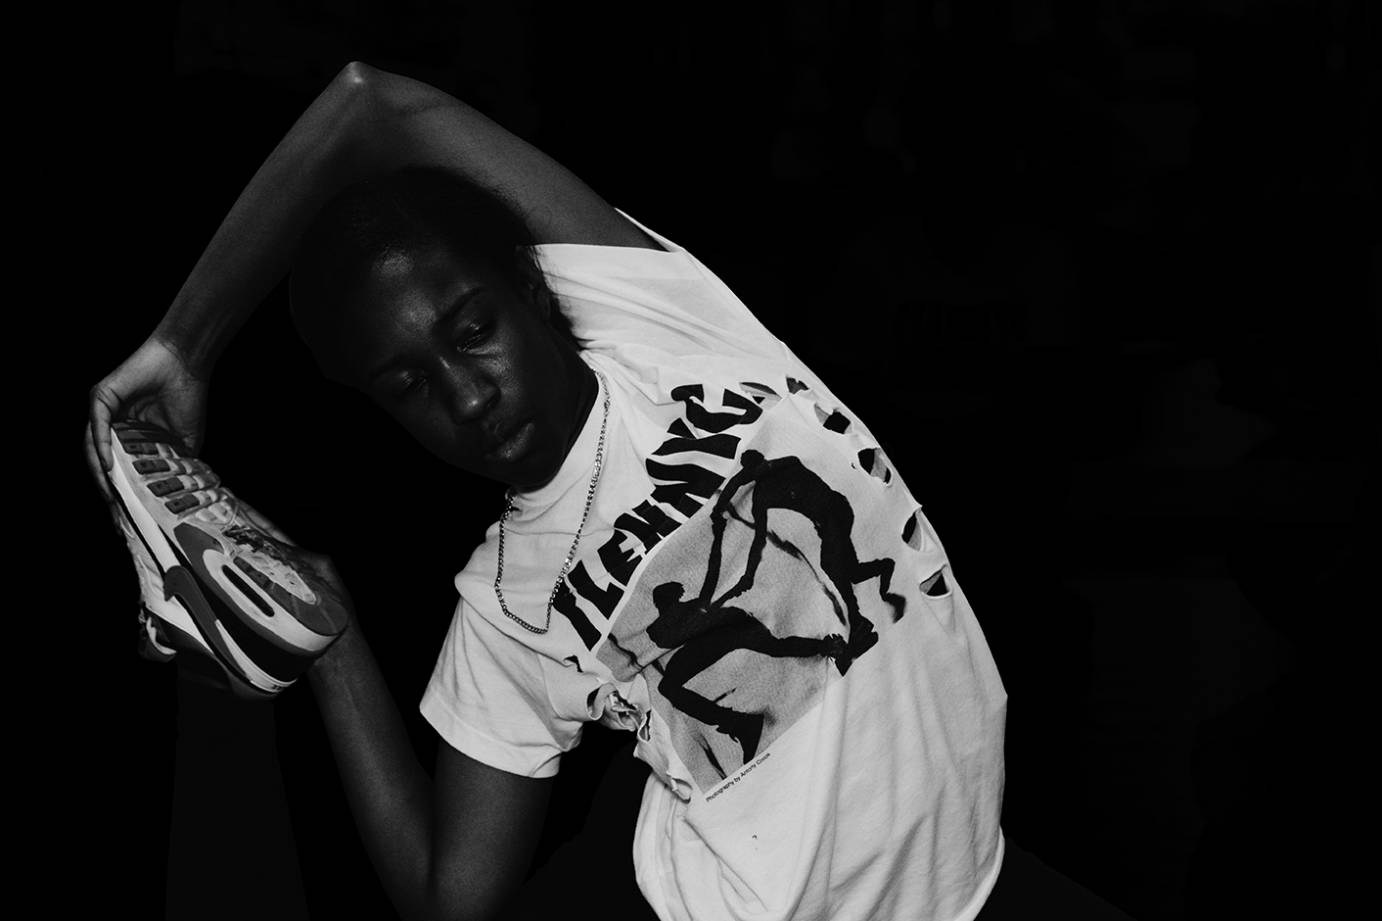 A black and white photograph of a dancer wearing a FlexNYC t-shirt and stretching his obliques while holding a sneaker.